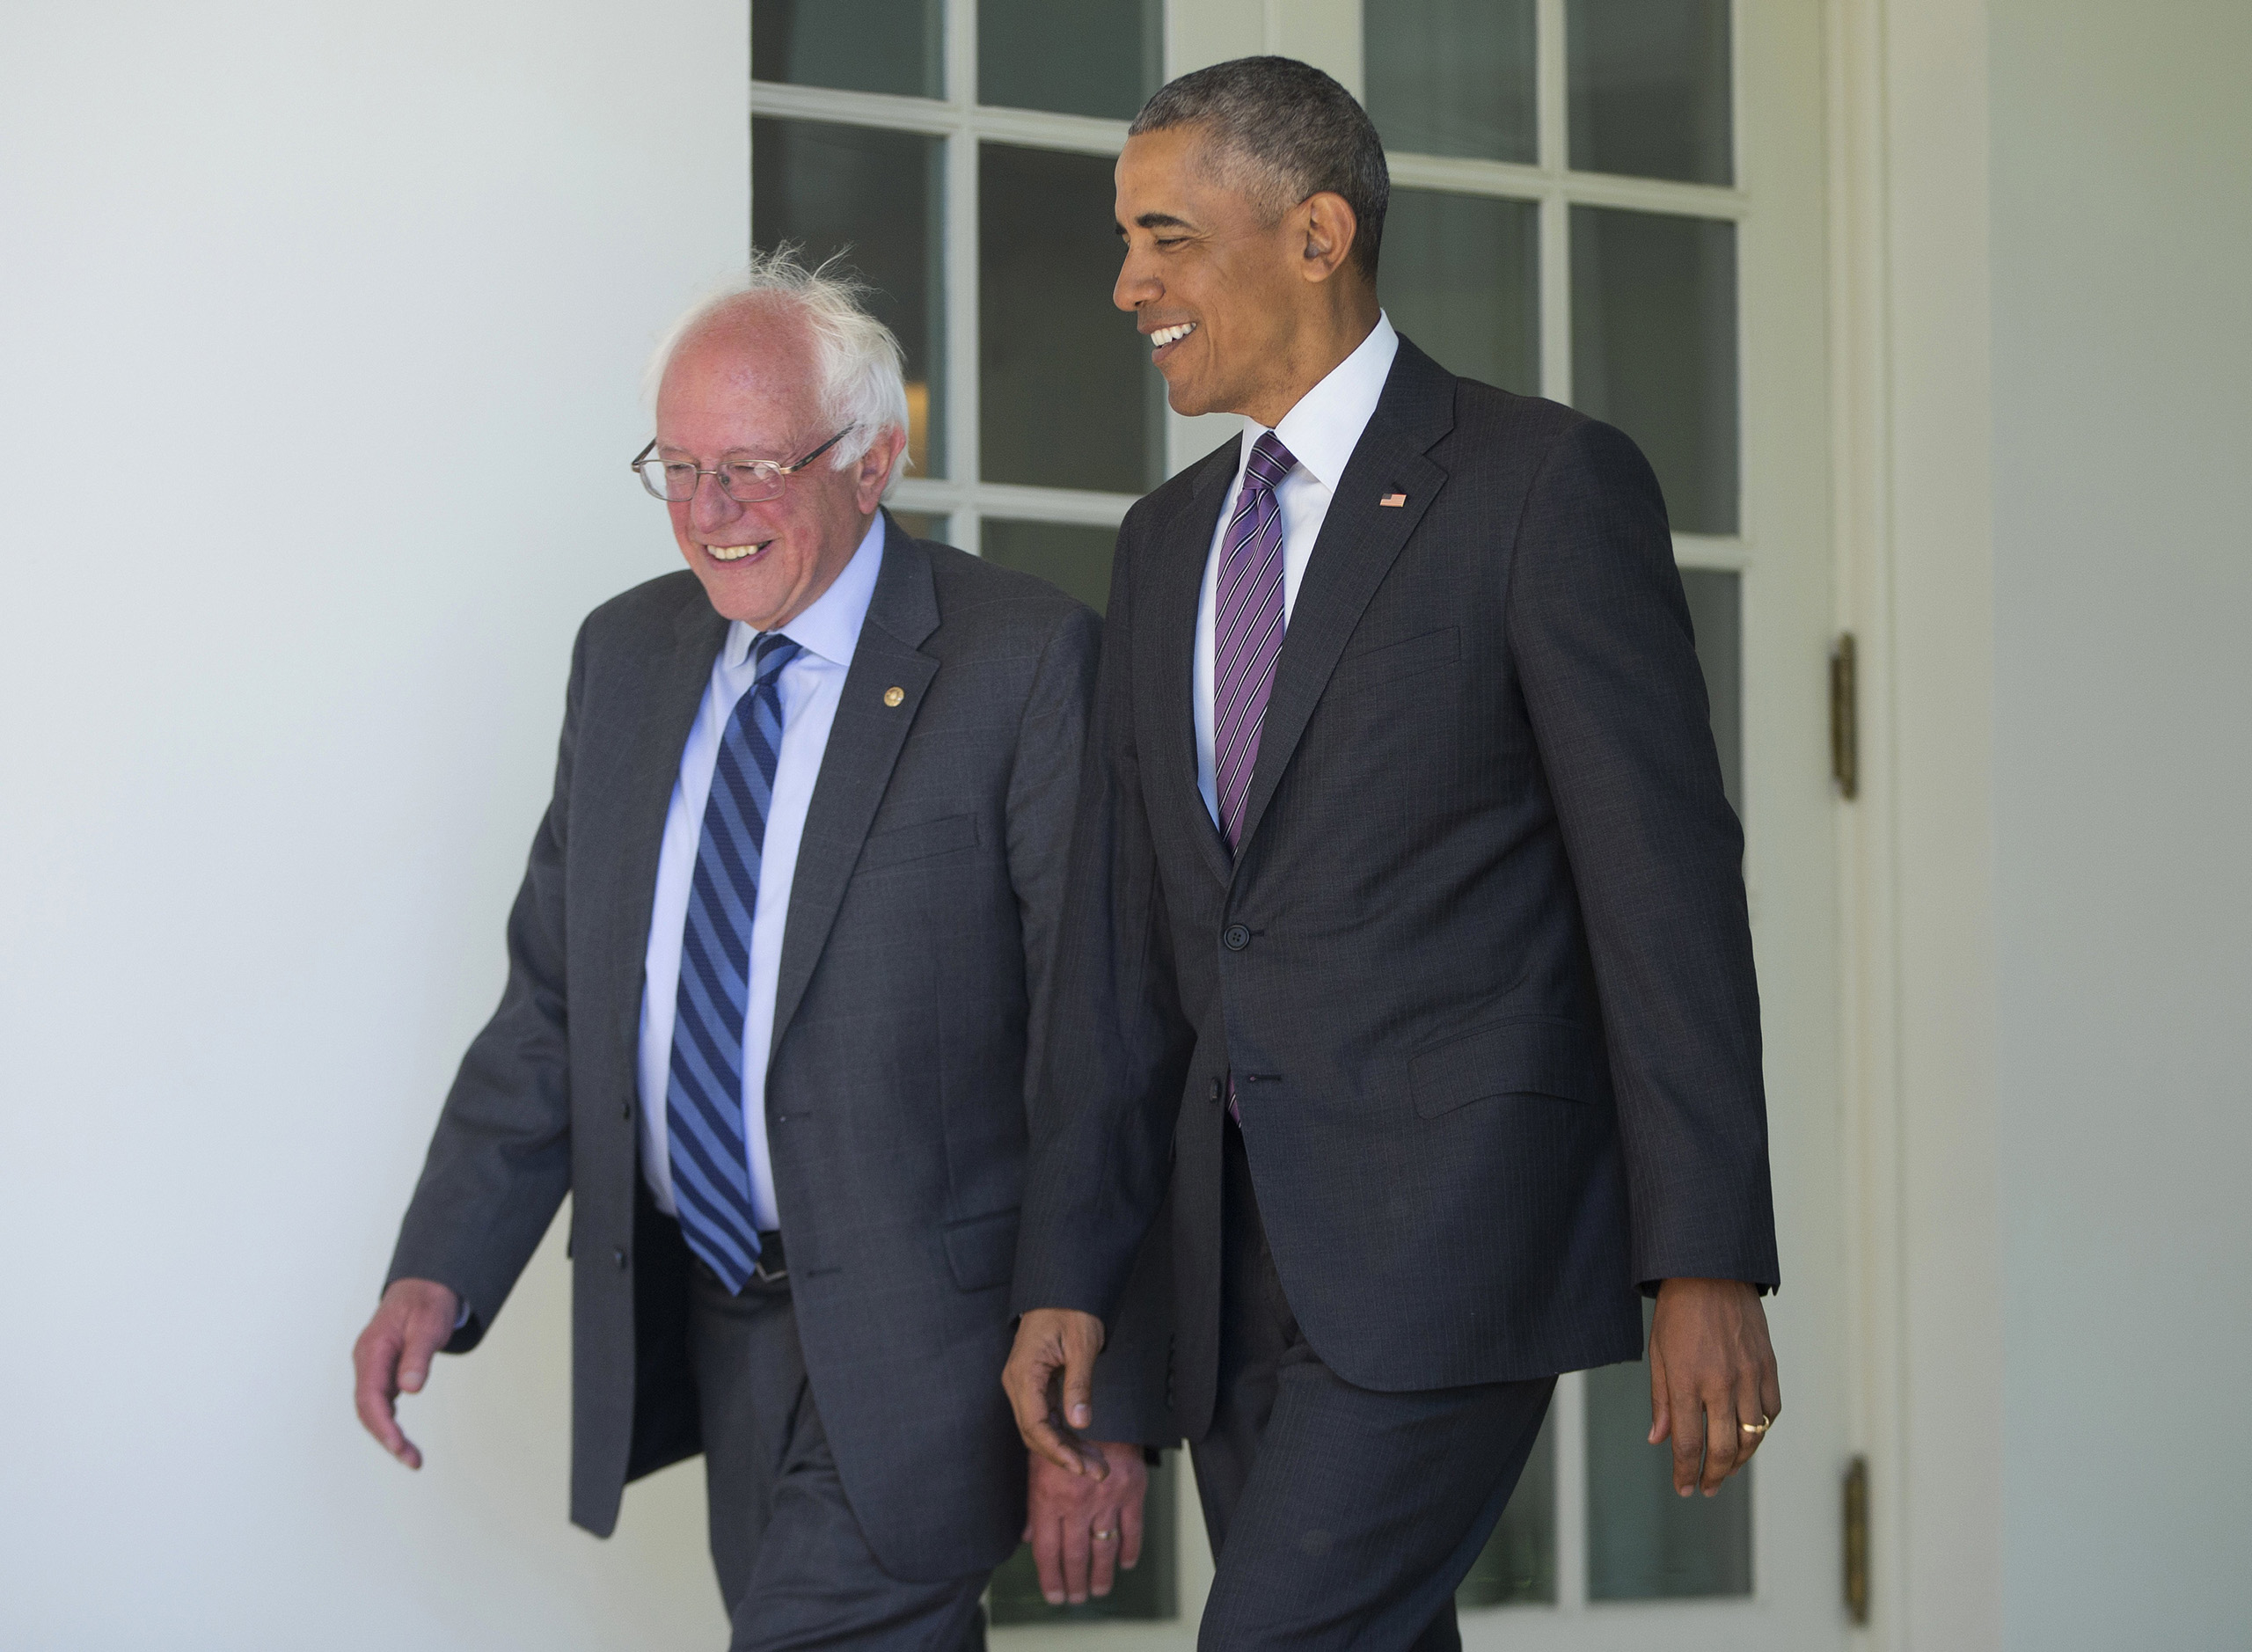 President Barack Obama walks with Democratic presidential candidate Bernie Sanders, down the Colonnade of the White House in Washington, D.C., June 9, 2016. (Pablo Martinez Monsivais—AP)